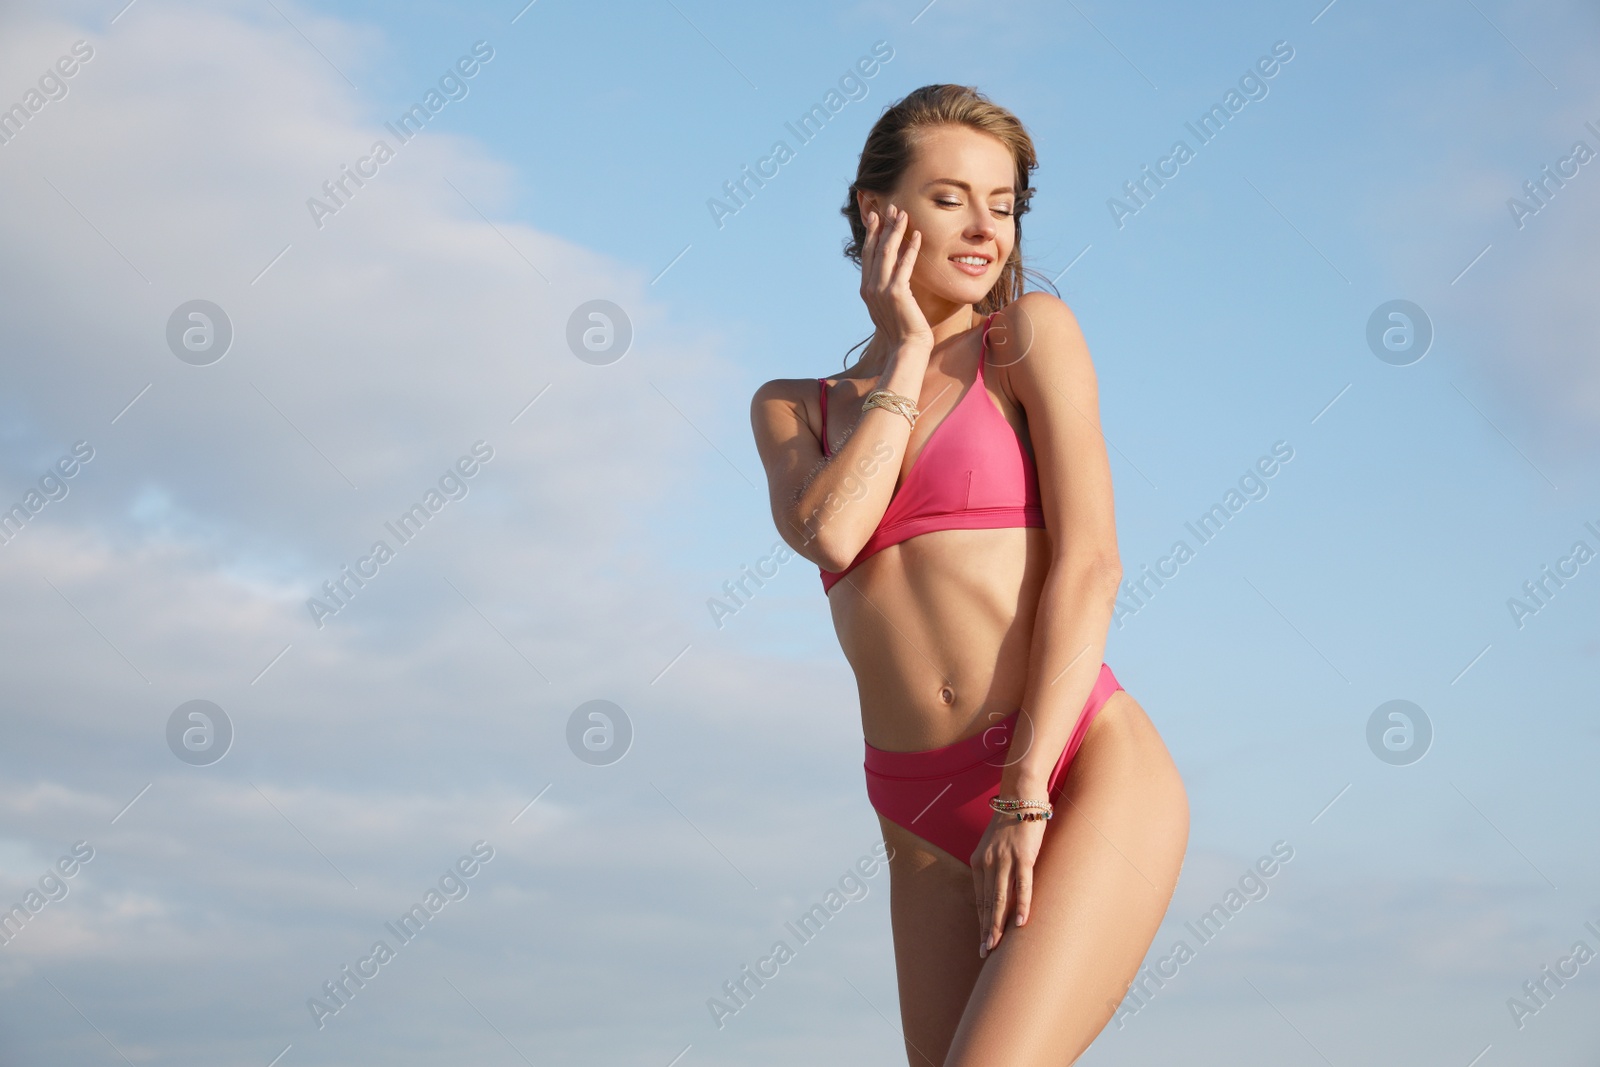 Photo of Attractive woman with beautiful body in bikini against blue sky. Space for text